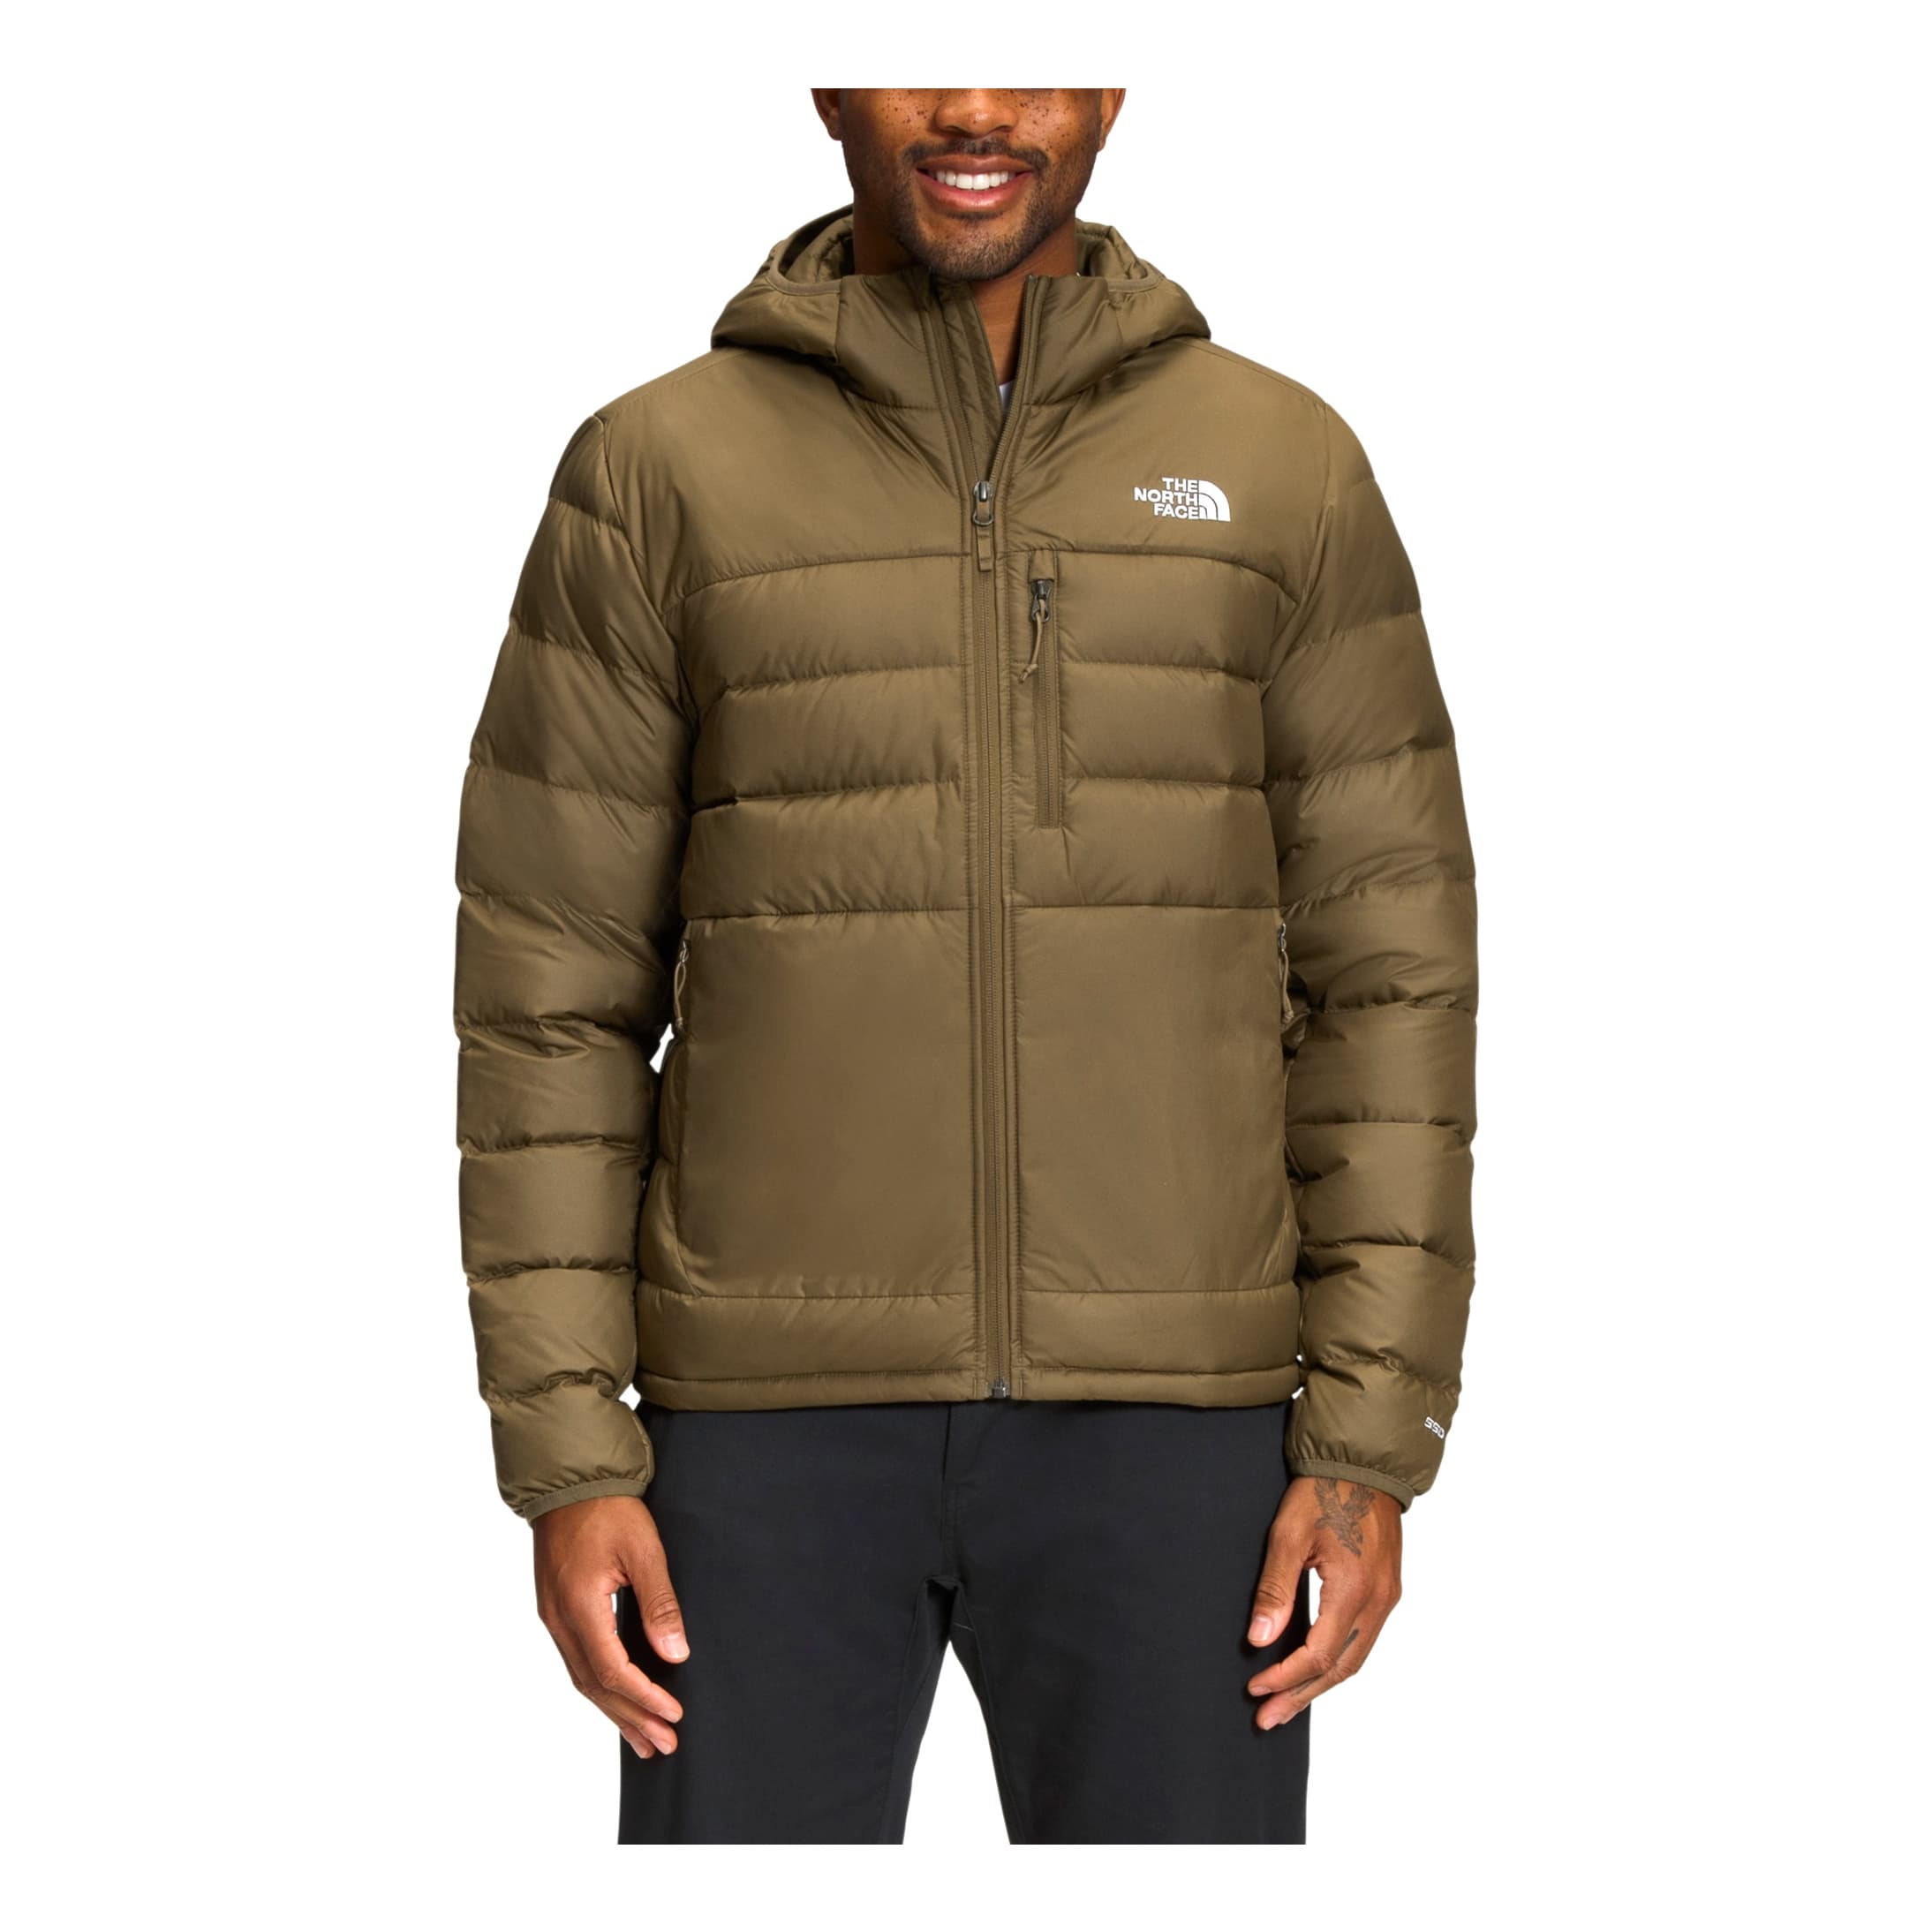 The North Face® Men’s Aconcagua 2 Hooded Jacket - Military Olive